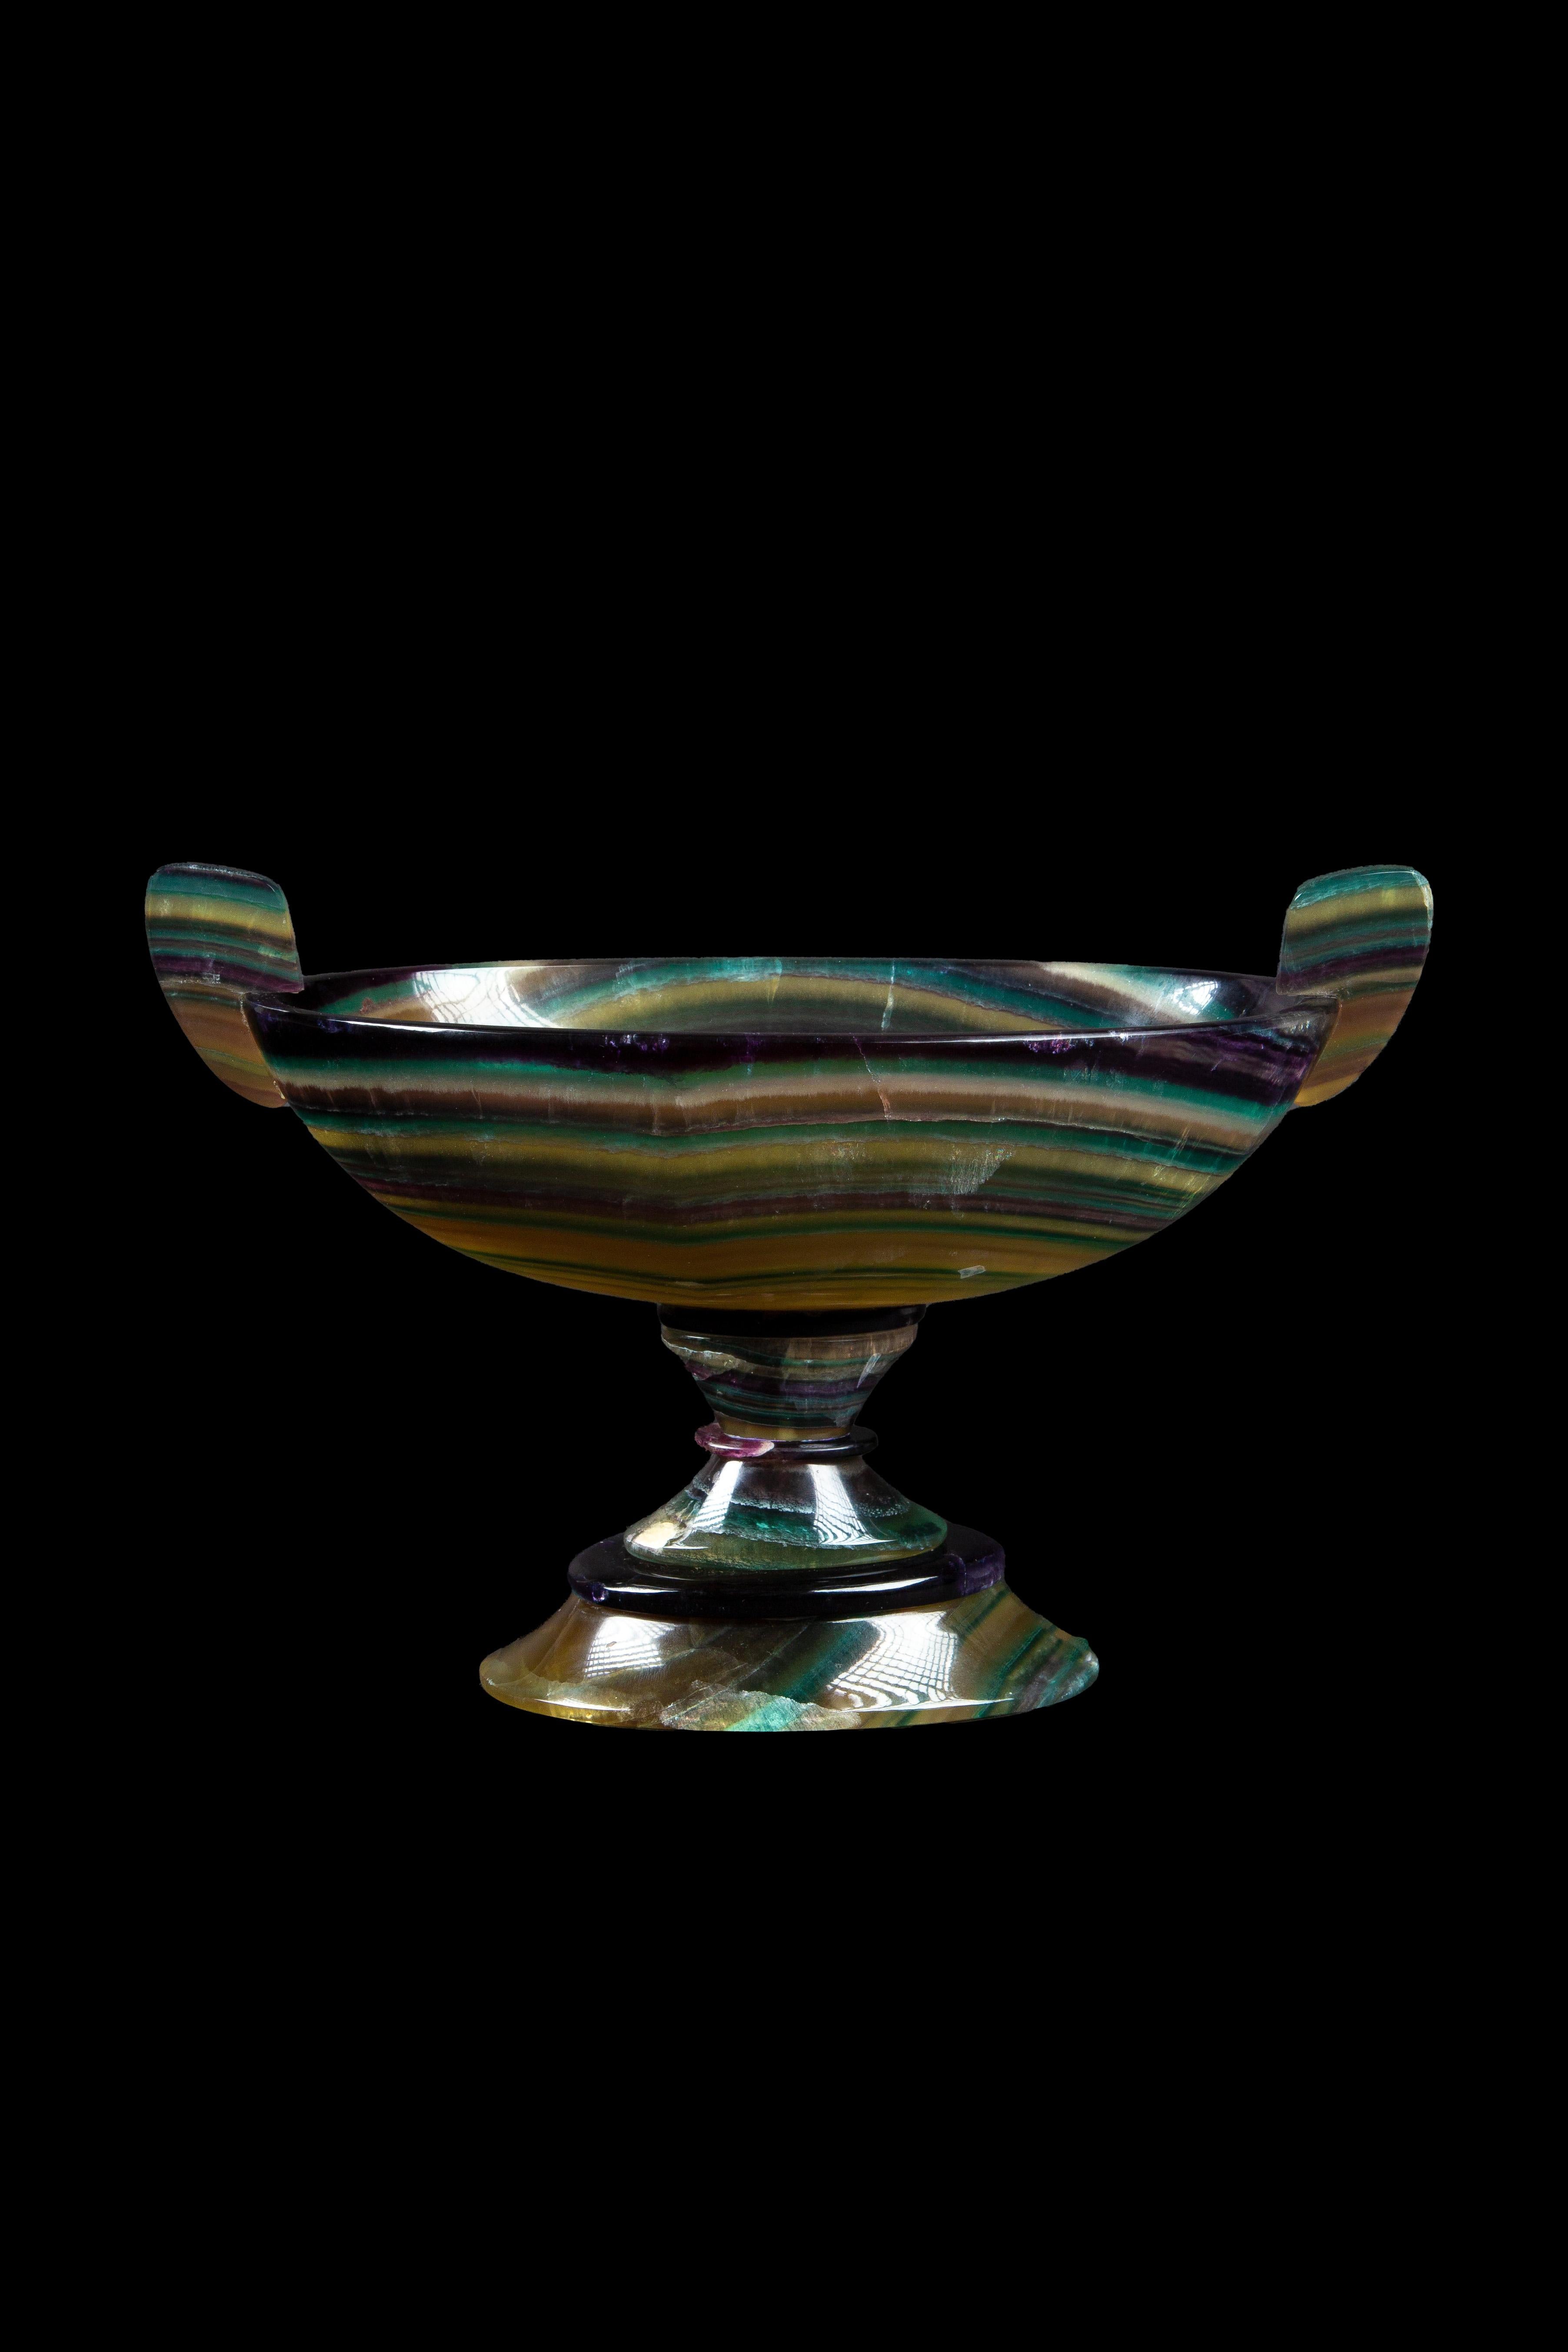 Exquisite craftsmanship of this hand-carved vessel hailing from the artisanal workshops of Argentina. Crafted from natural Fluorite, renowned for its captivating hues and inherent beauty, this vessel transcends mere functionality to become a